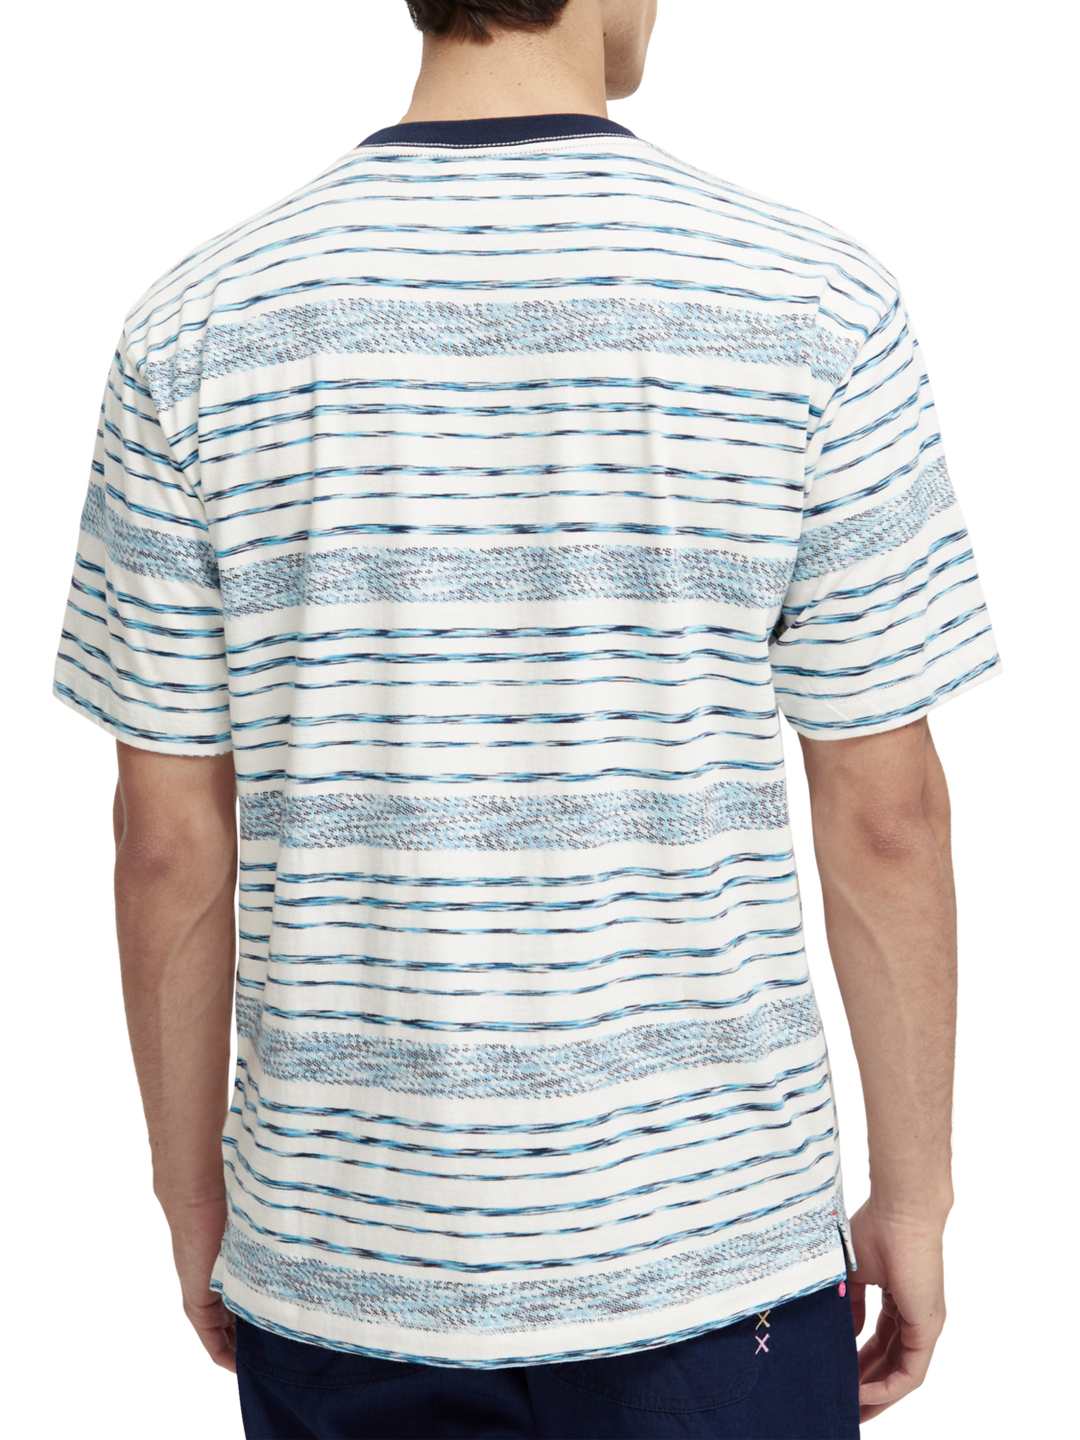 Jersey Structured Striped Tee in White-Blue Stripe | Buster McGee